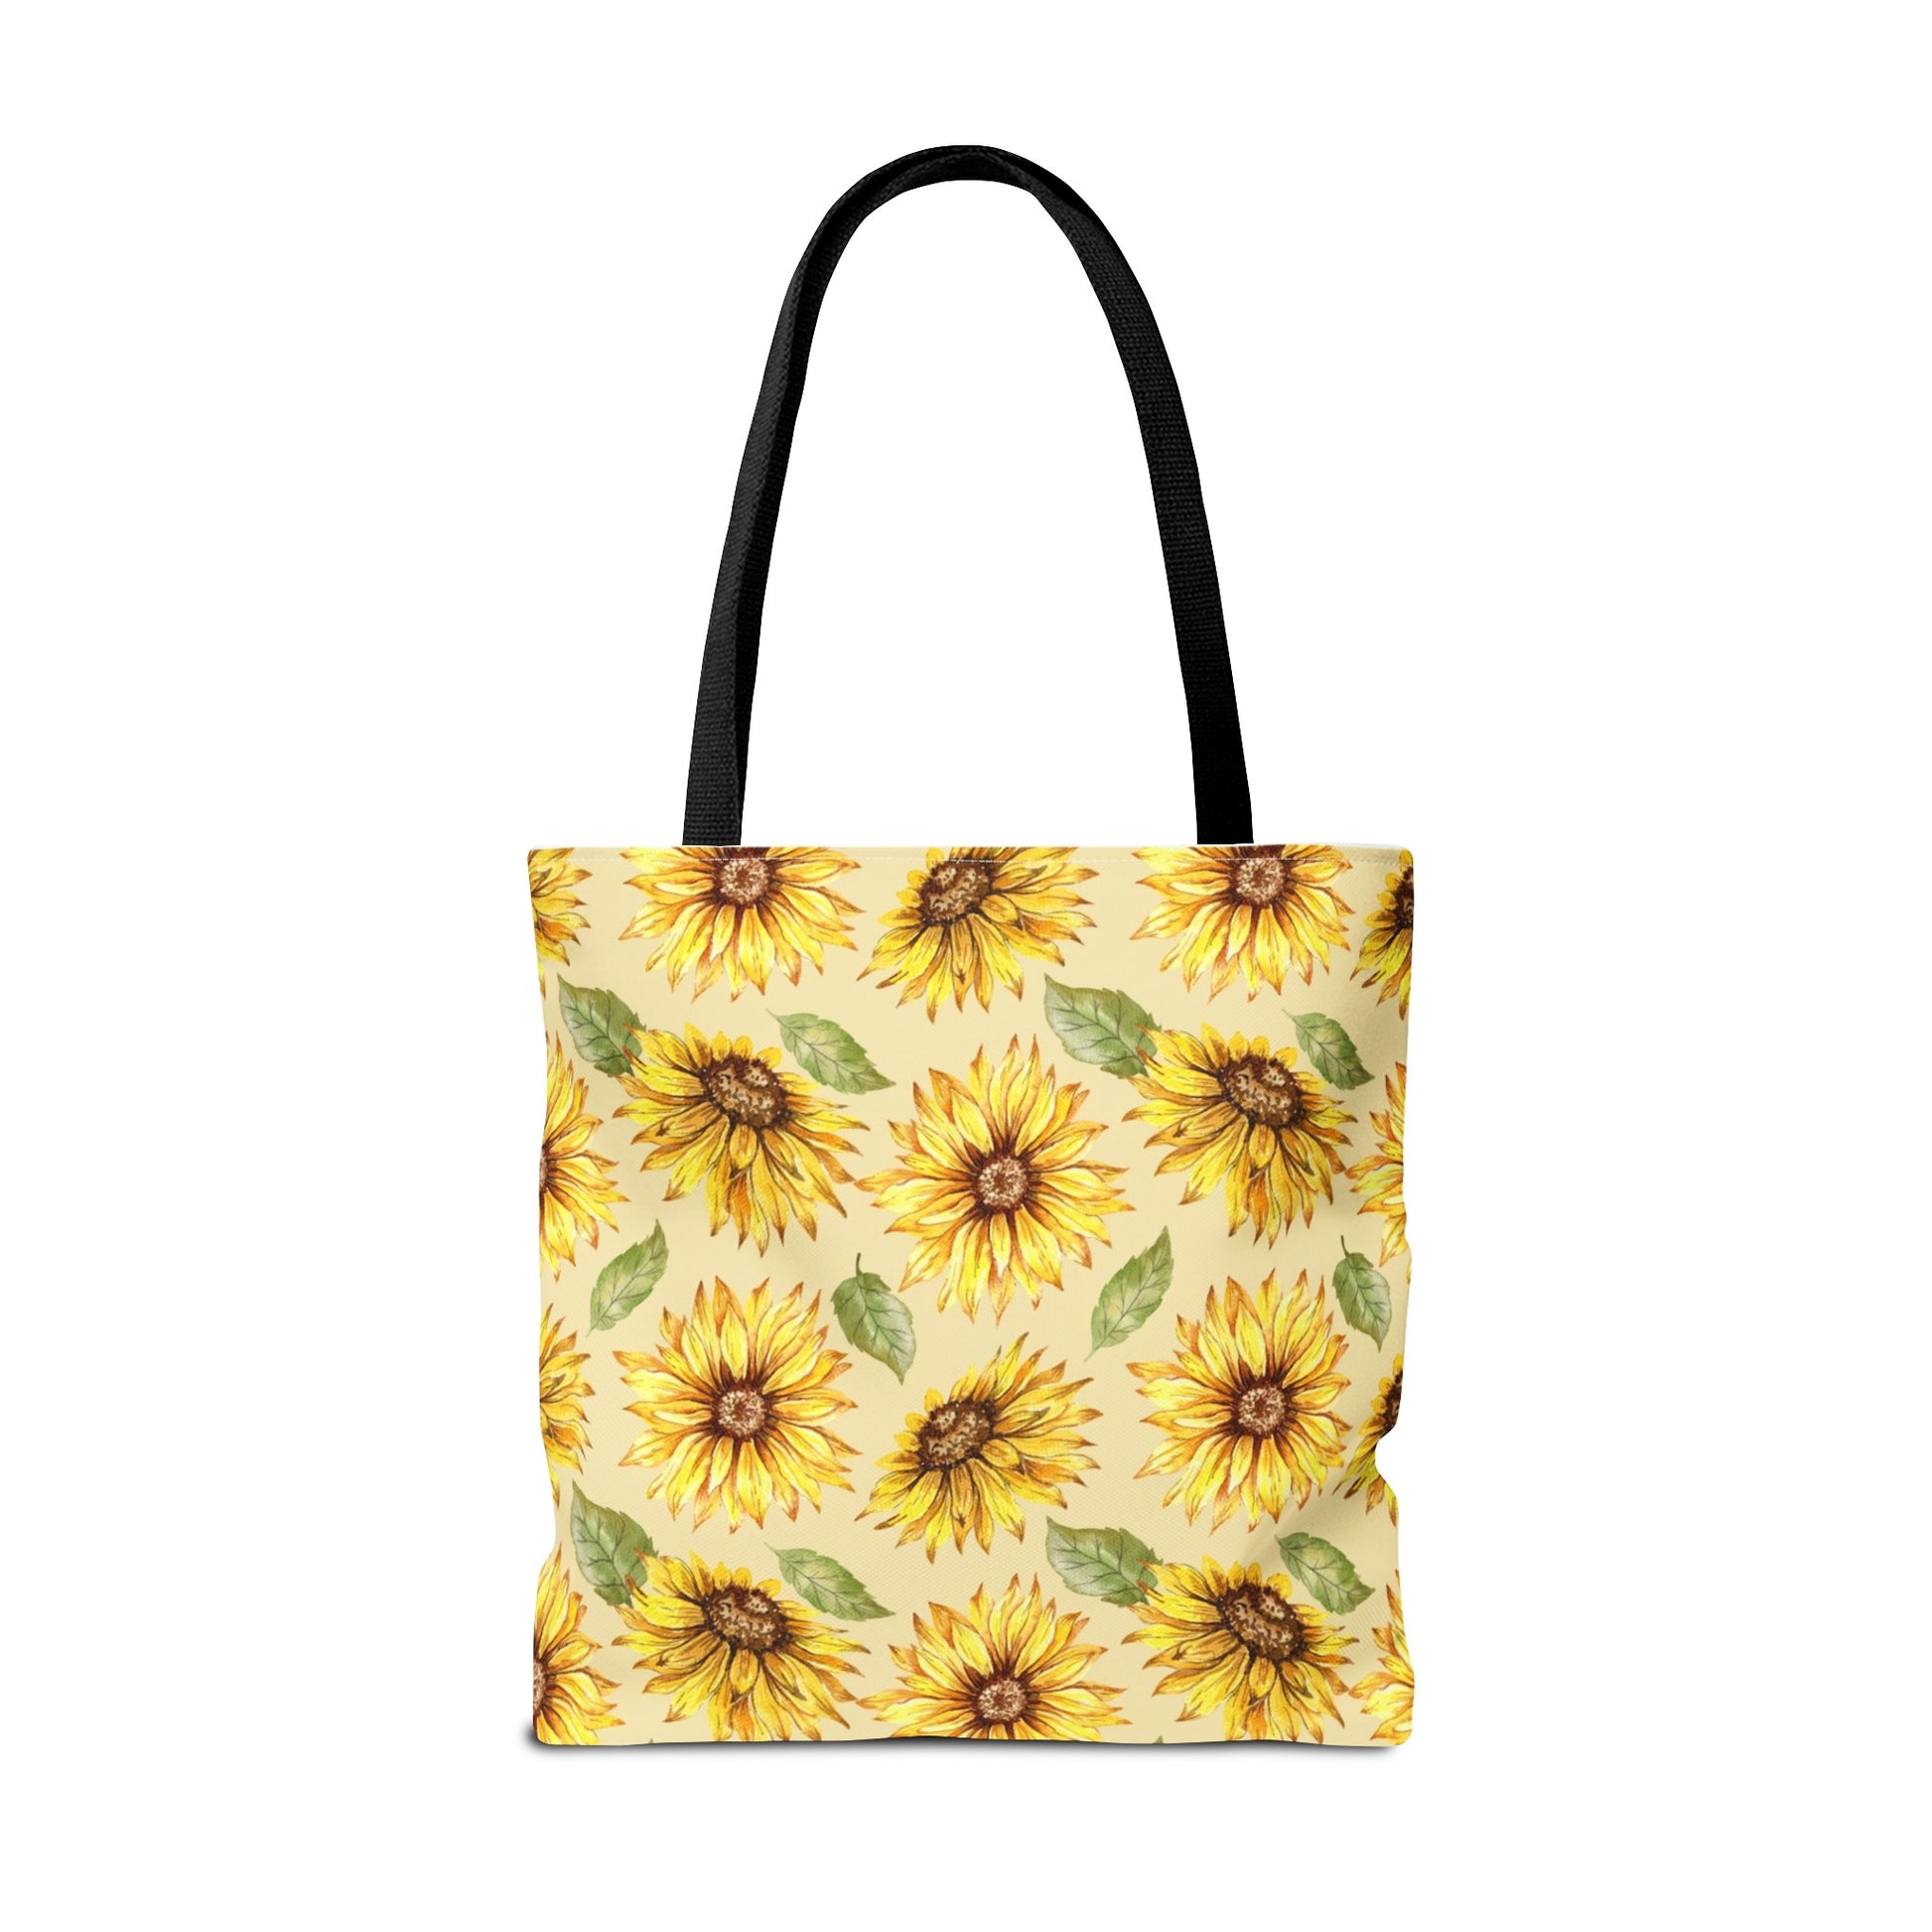 Printify's Yellow Floral Tote Bag with sunflower print and black handles, assembled in the USA, set against a white background.